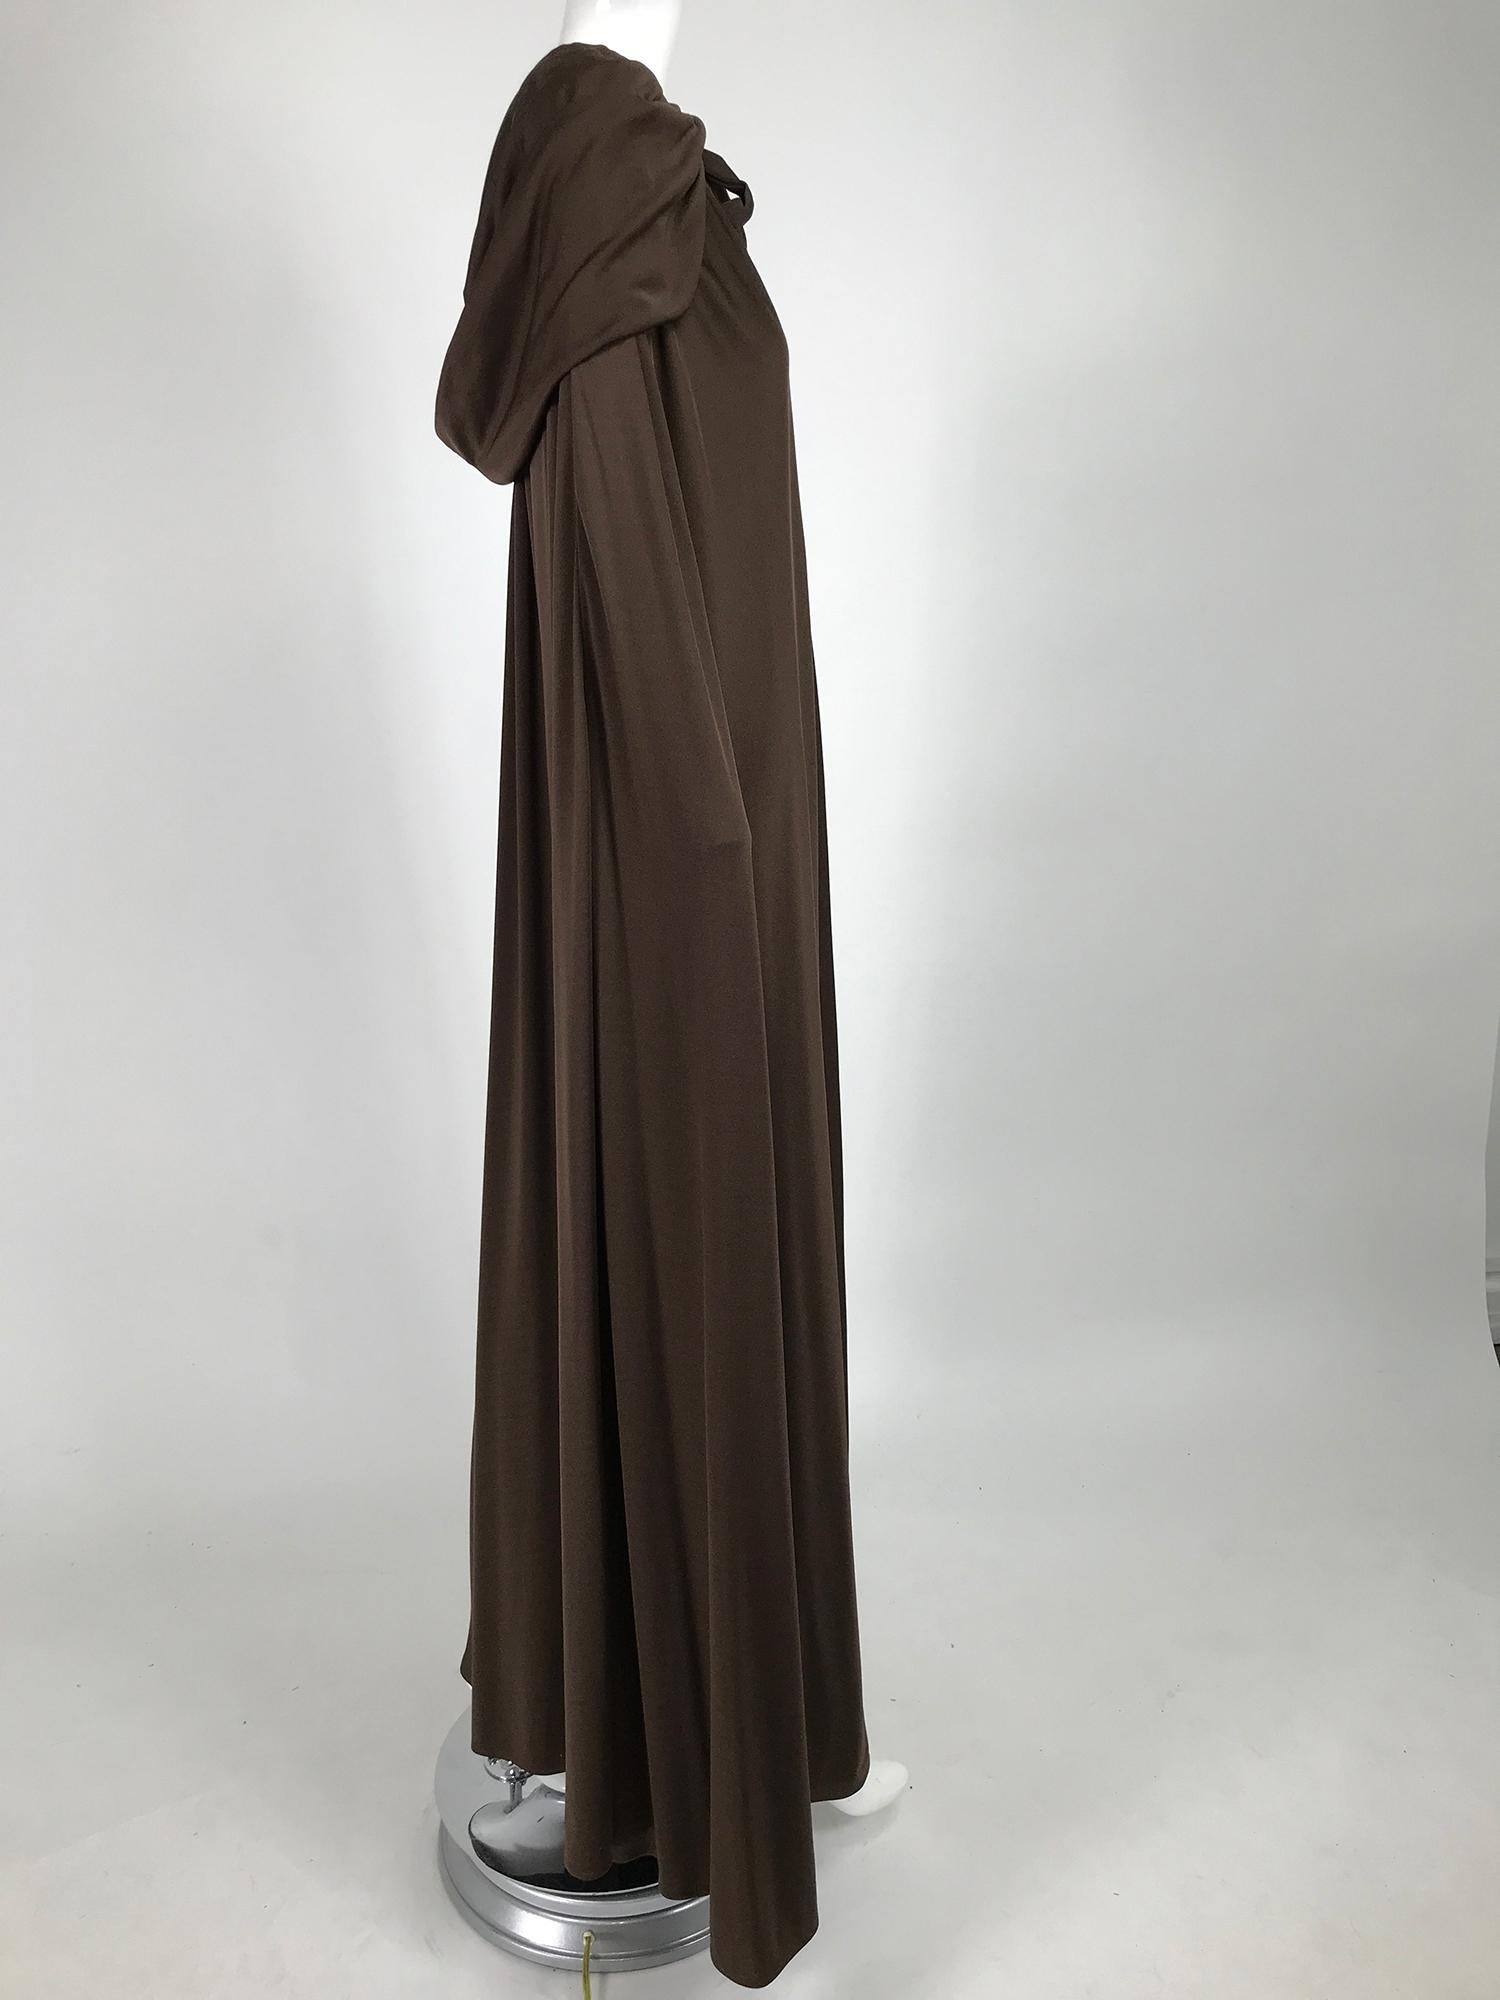 Loris Azzaro Couture Chocolate Brown Silky Jersey Full Length Hooded Cape 1970s For Sale 1